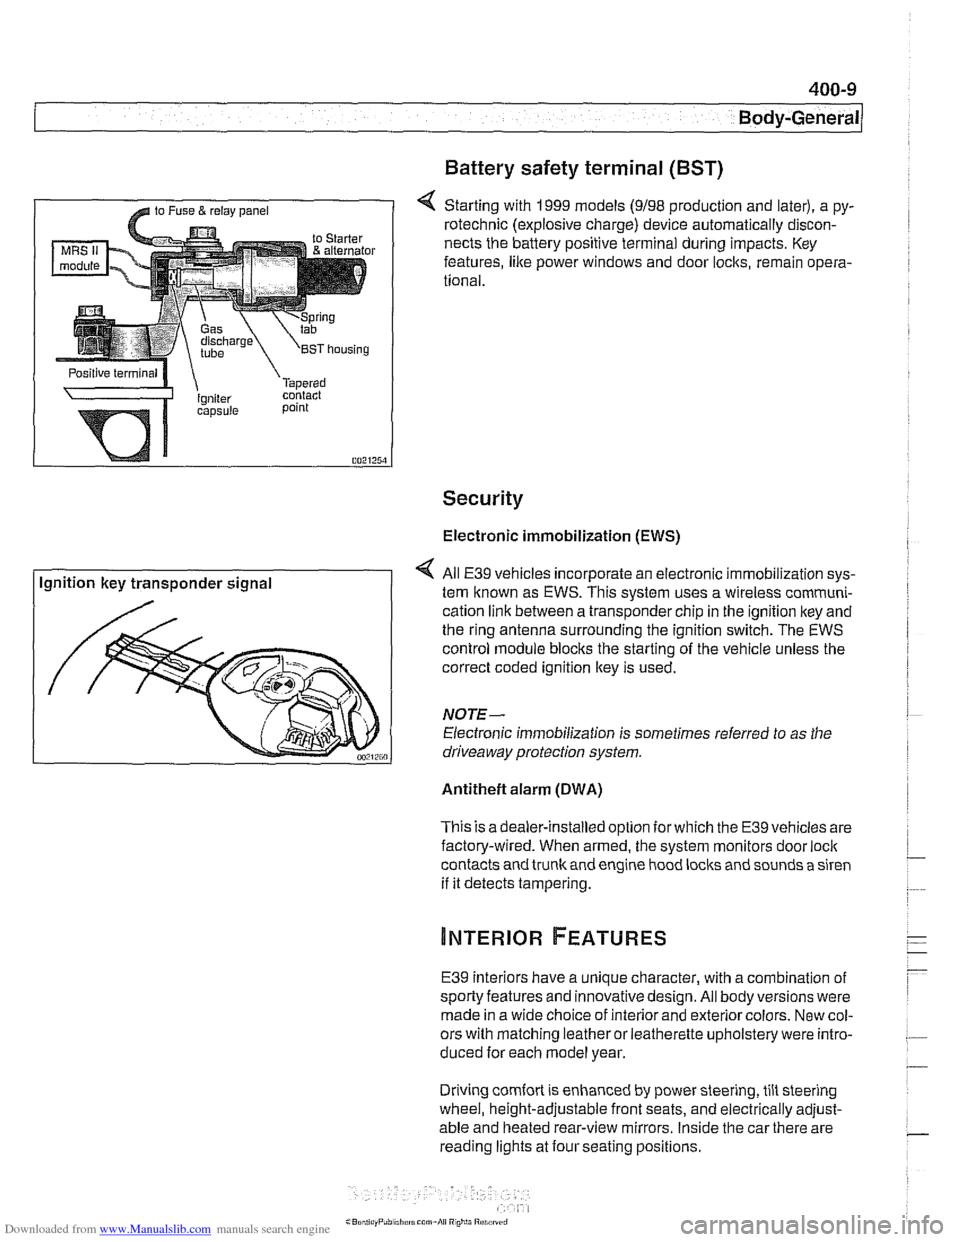 BMW 525i 1999 E39 Workshop Manual Downloaded from www.Manualslib.com manuals search engine 
400-9 
Body-General 
Battery  safety terminal 
(BST) 
4 Starting  with 1999 models (9198 production  and later), a py- 
rotechnic  (explosive 